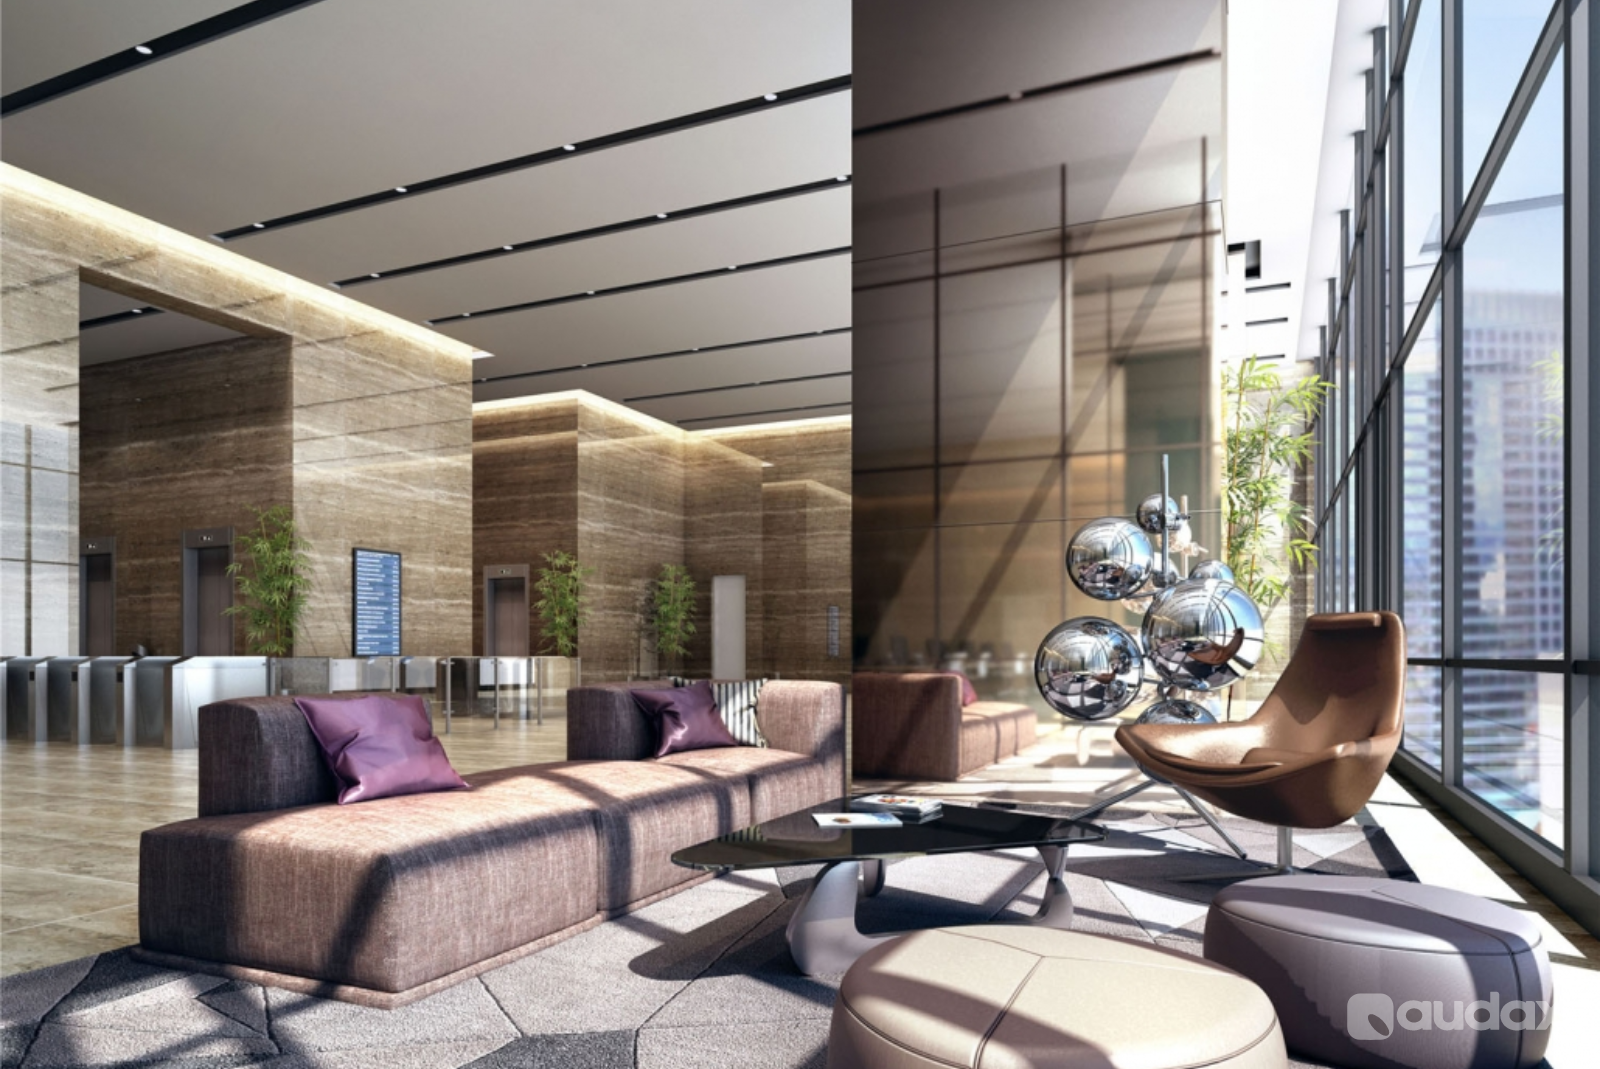 3D Rendering Real Estate Perspective By Audax 